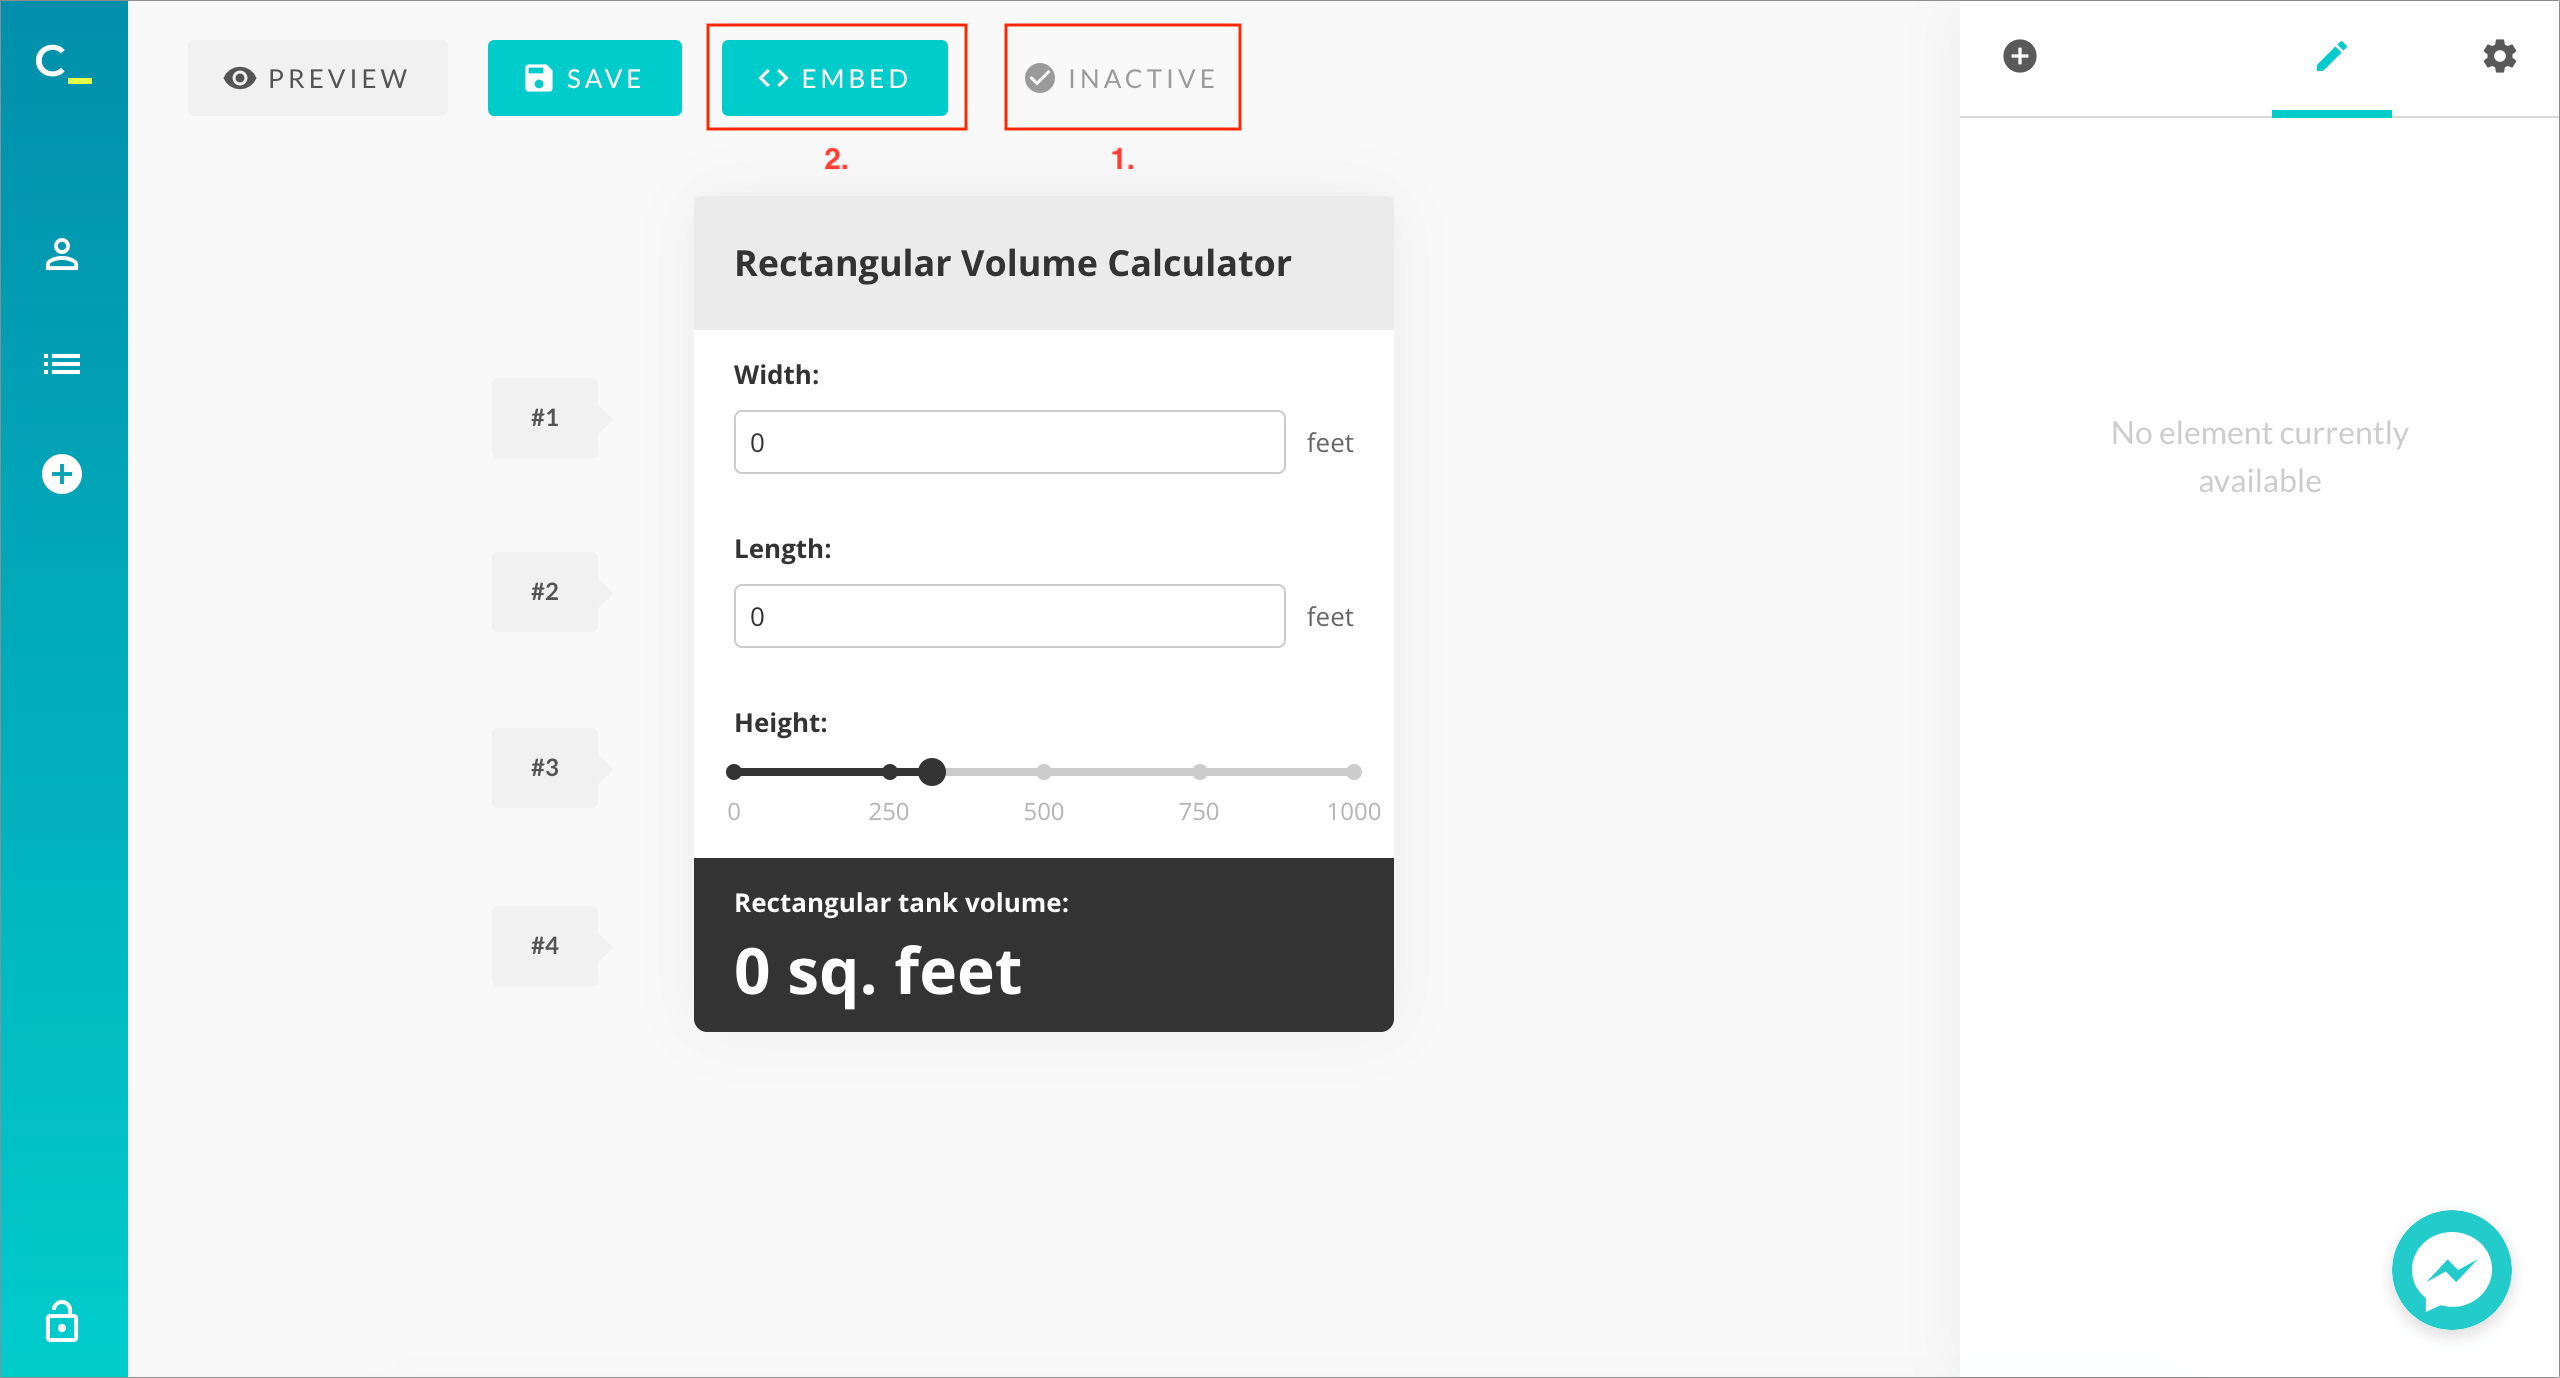 Activate your calculator before embeding